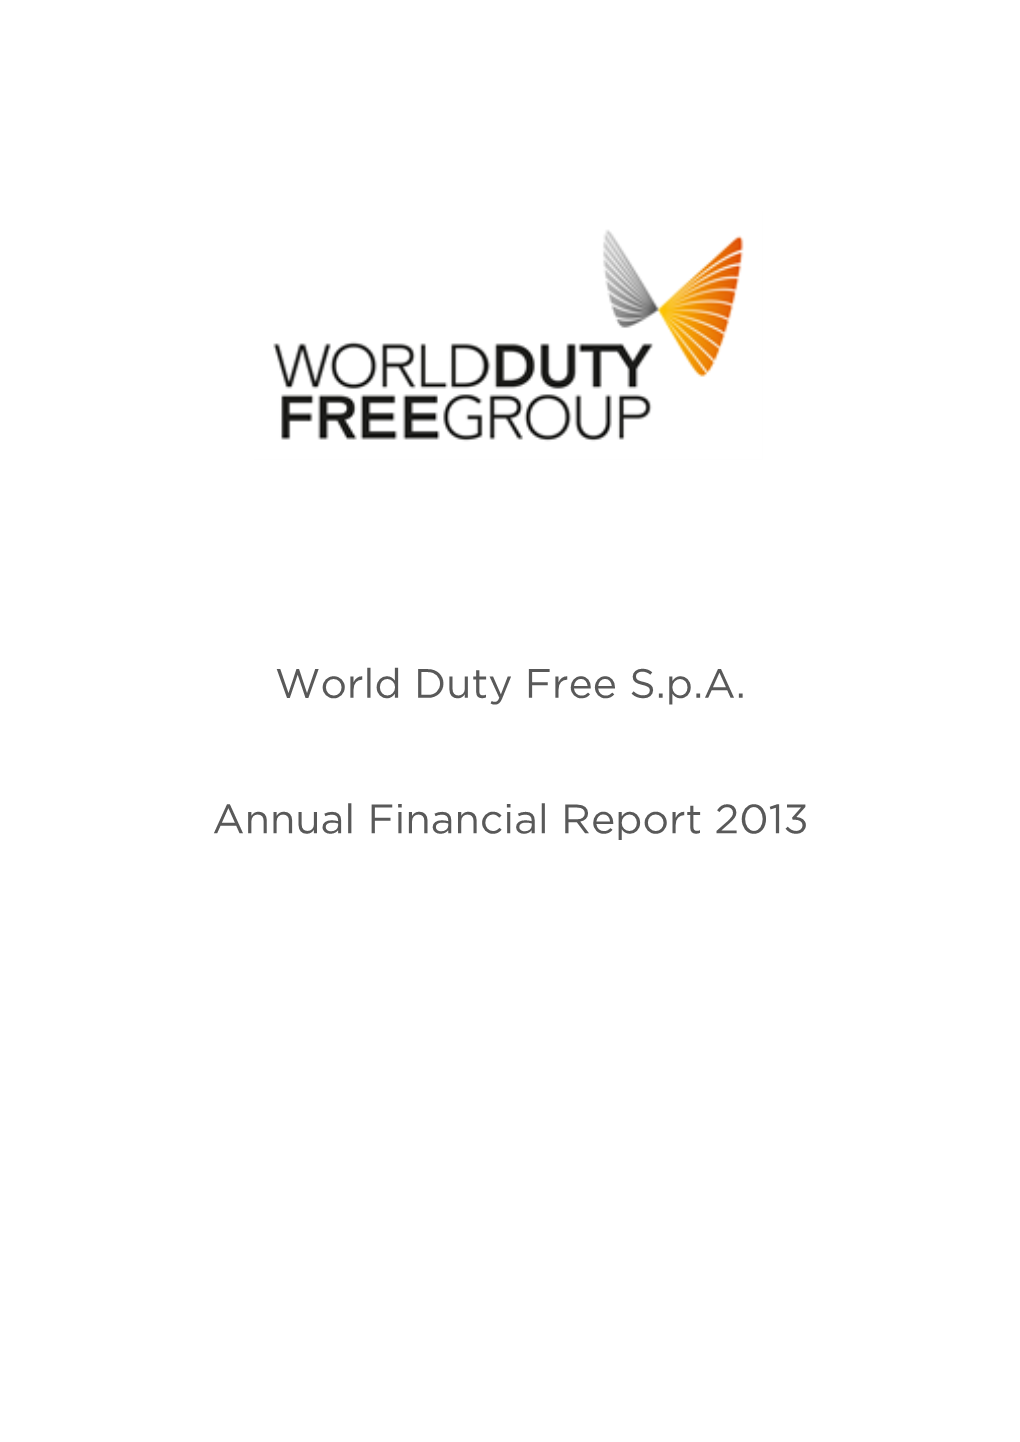 World Duty Free S.P.A. Annual Financial Report 2013